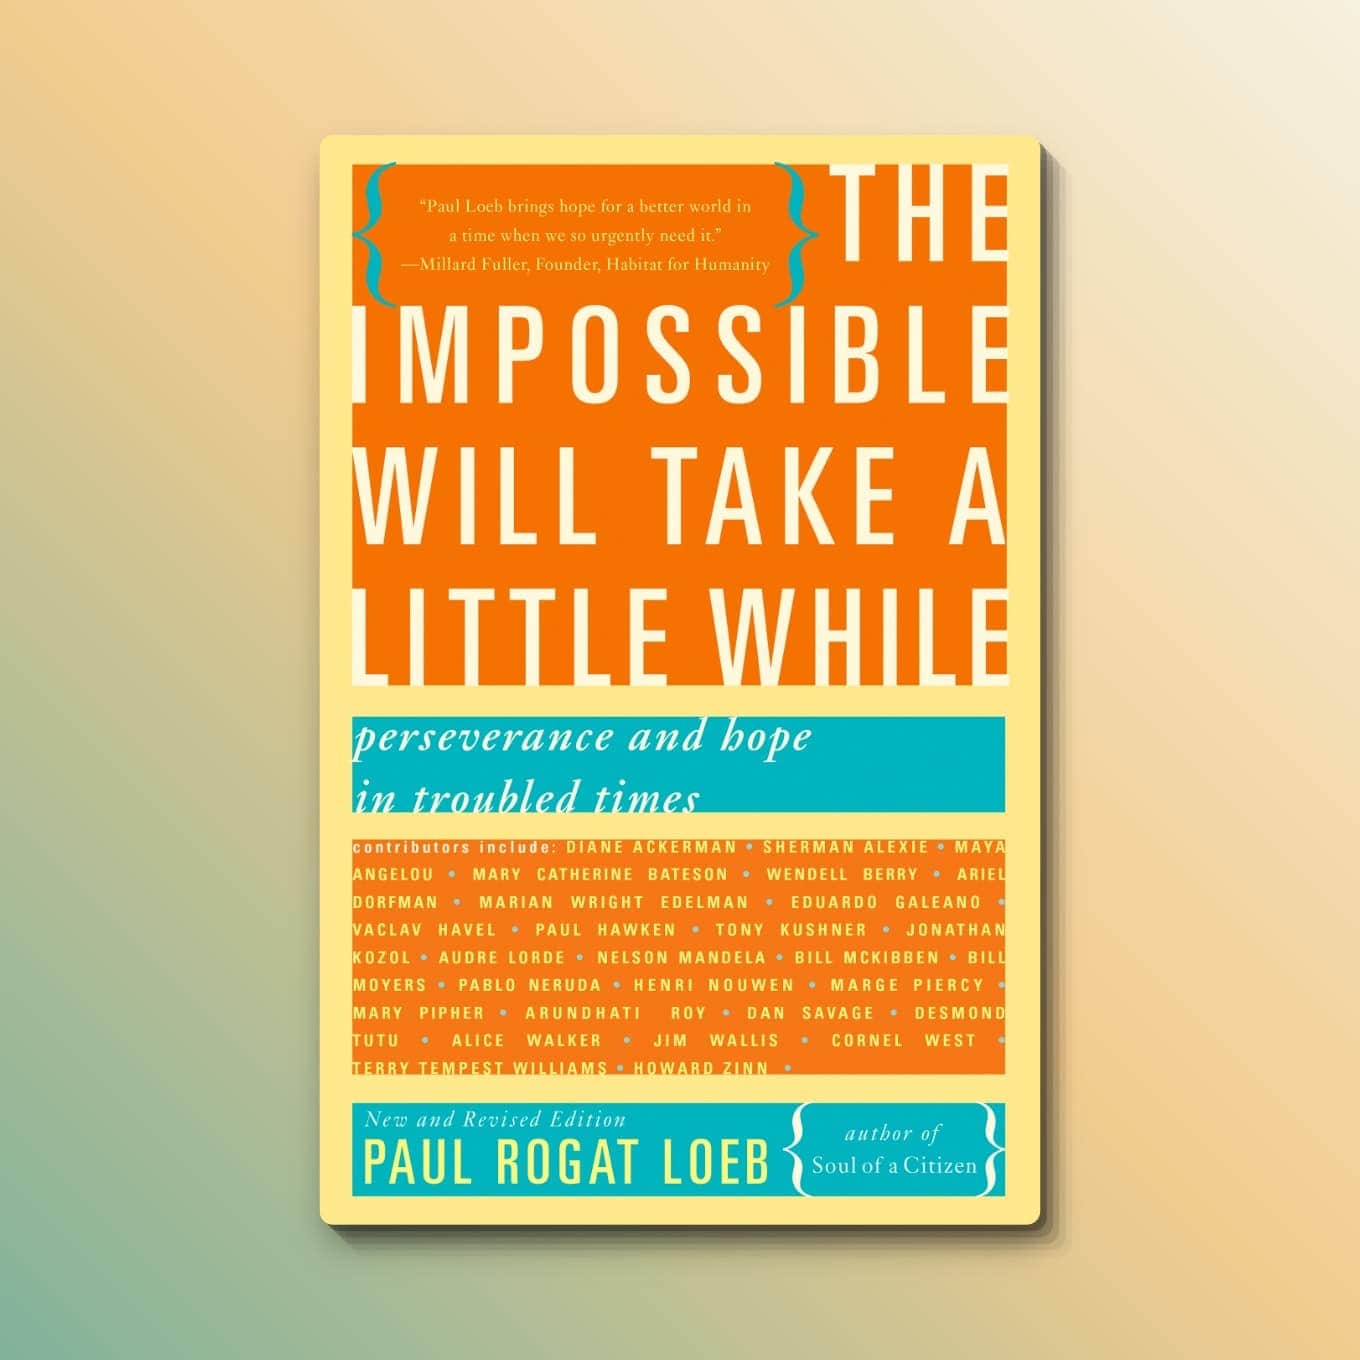 “The Impossible Will Take a Little While: A Citizen’s Guide to Hope in a Time of Fear” edited by Paul Rogat Loeb